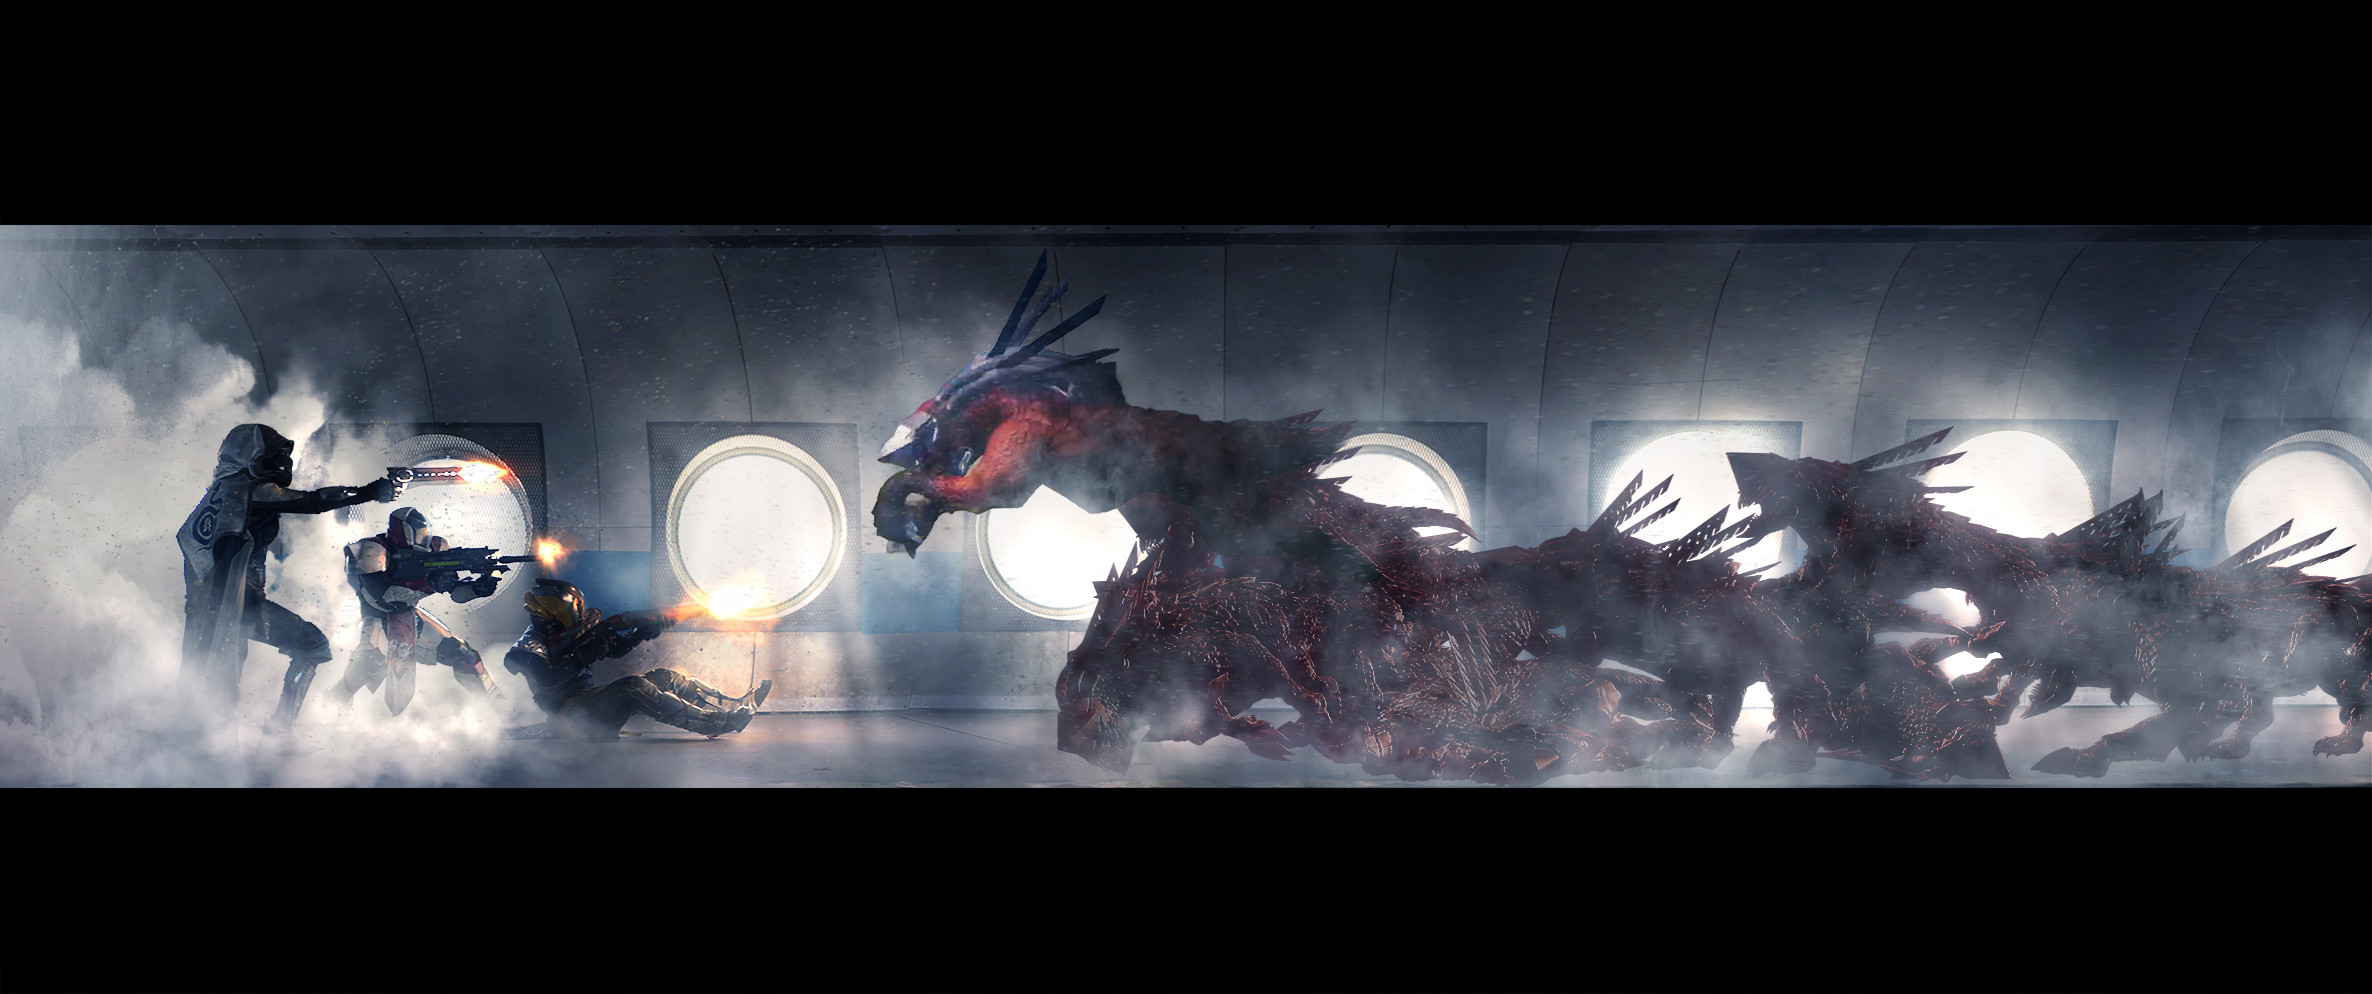 Concept Art - the beasts depicted were Zbrush models without textures, so I painted details only on the leading beast and used silhouettes for the rest against the window light to save time.